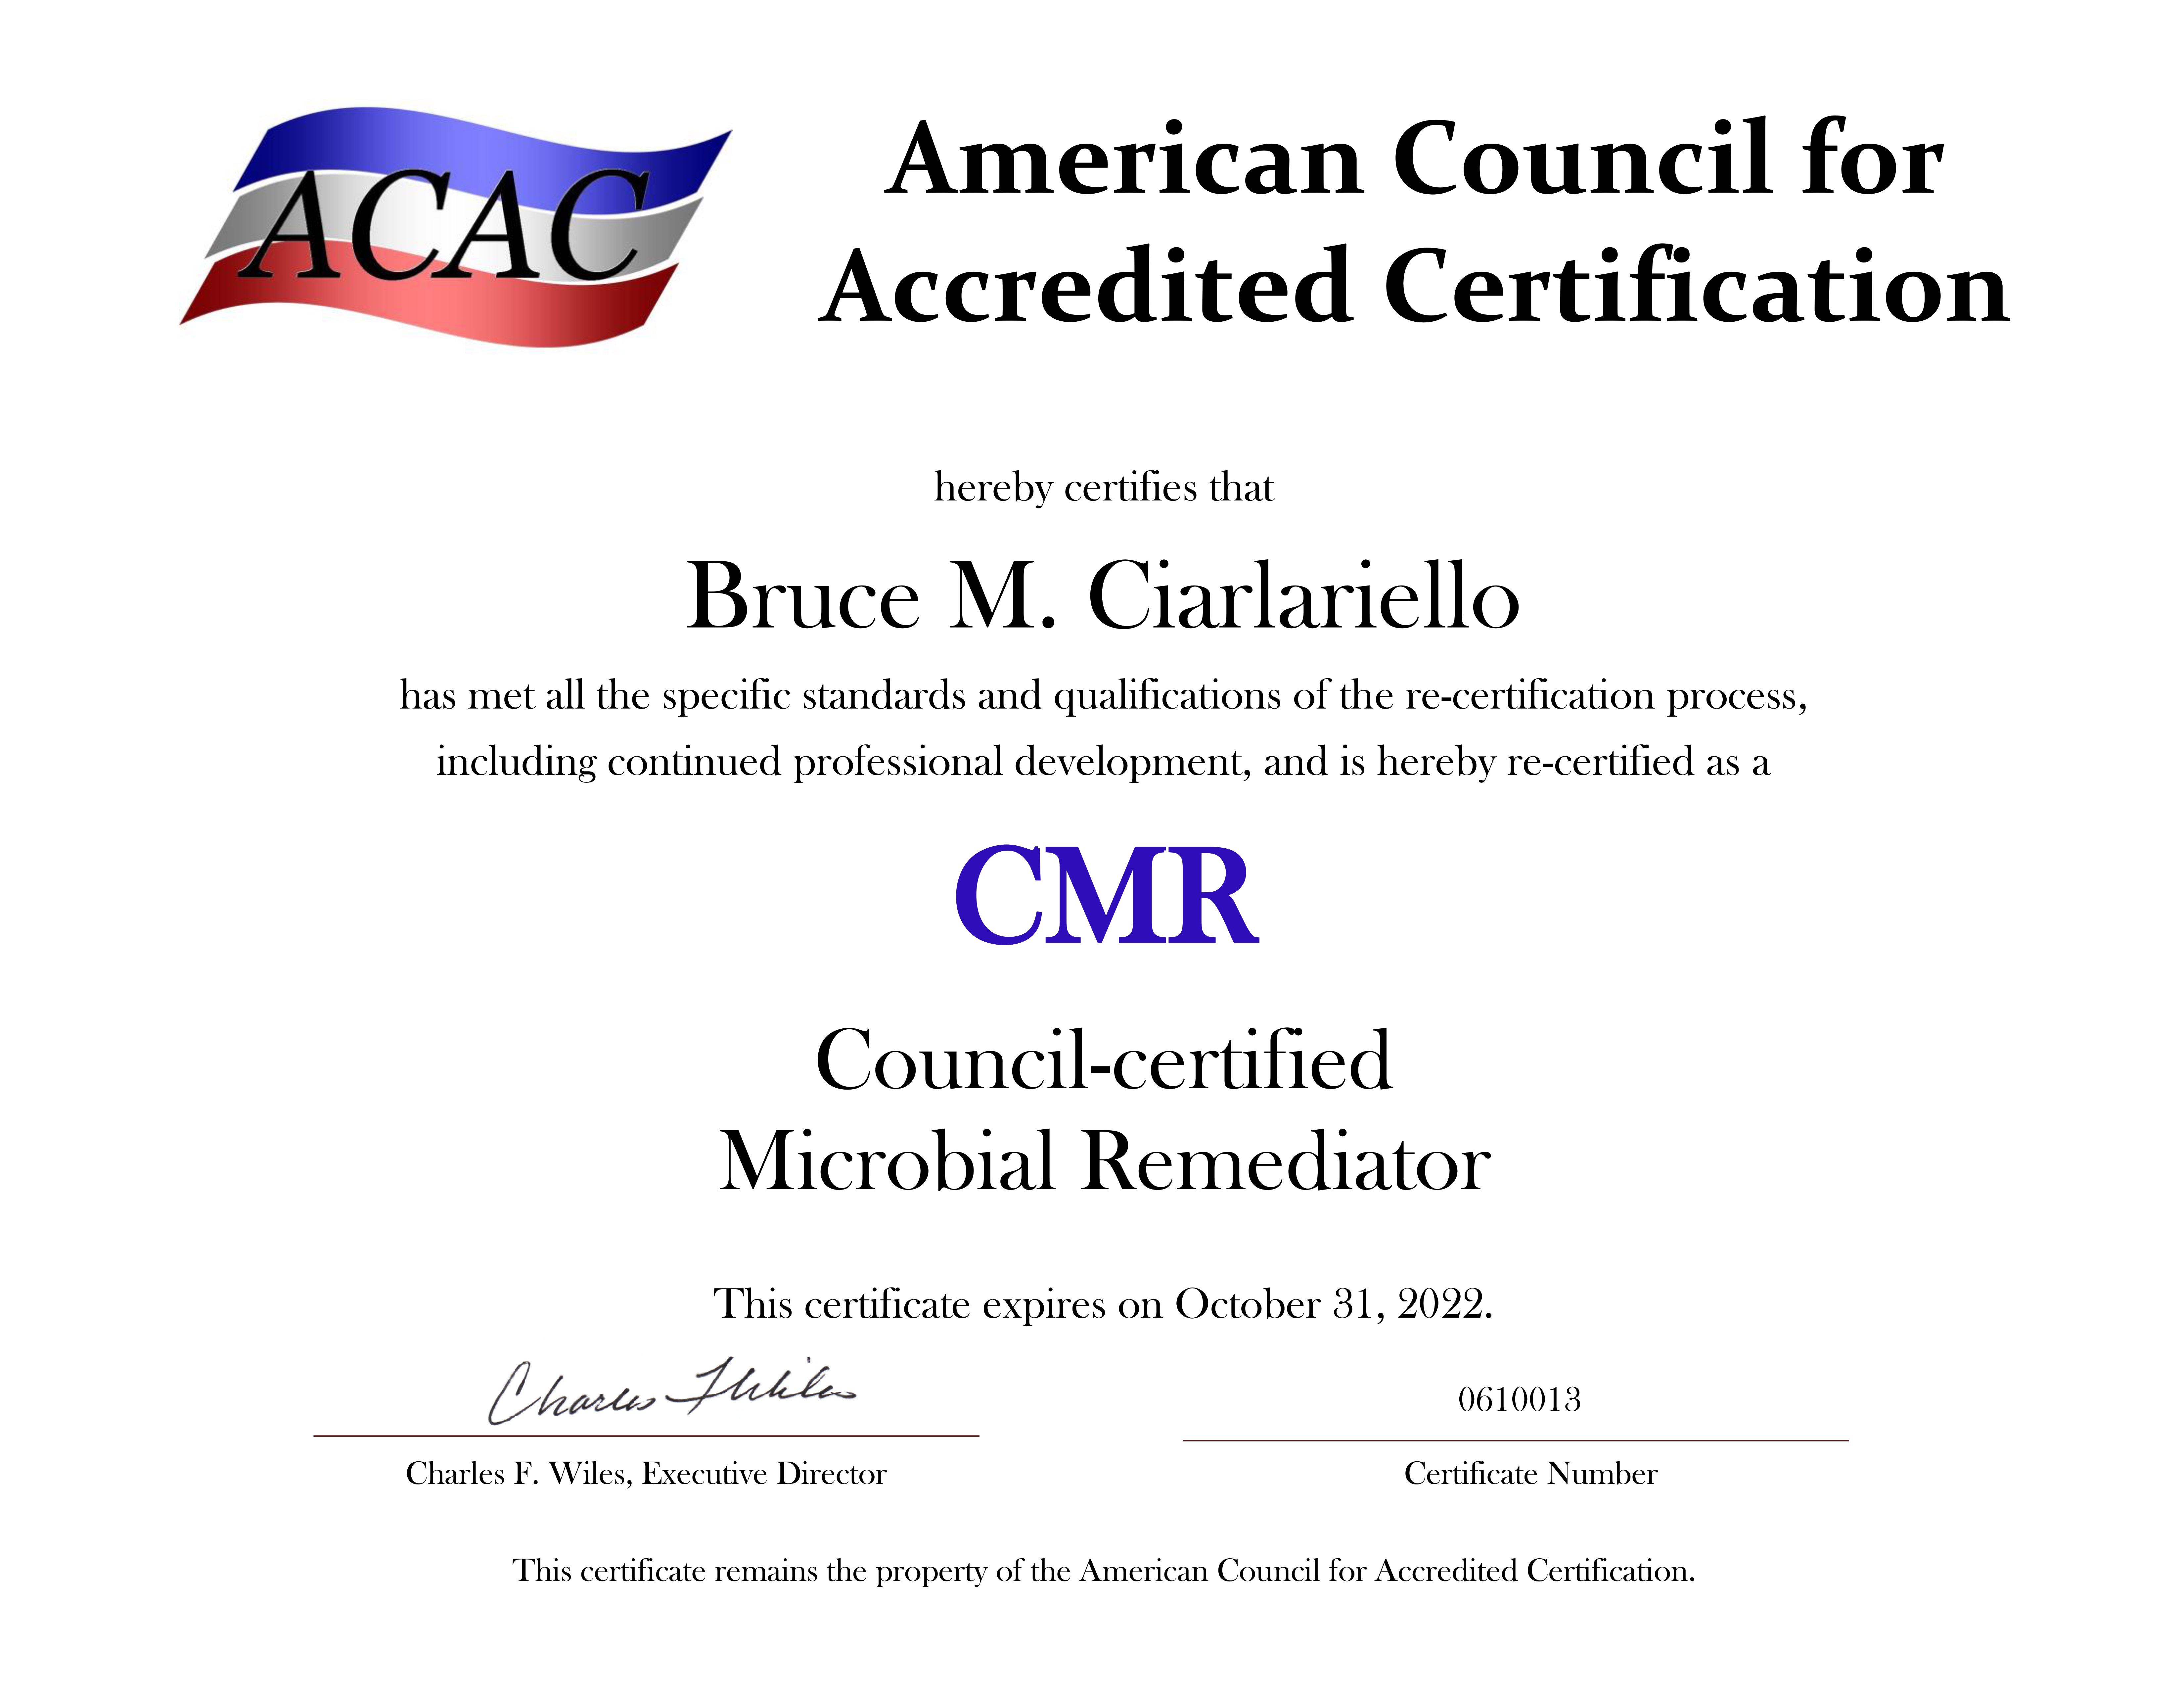 American Council for Accredited Certification